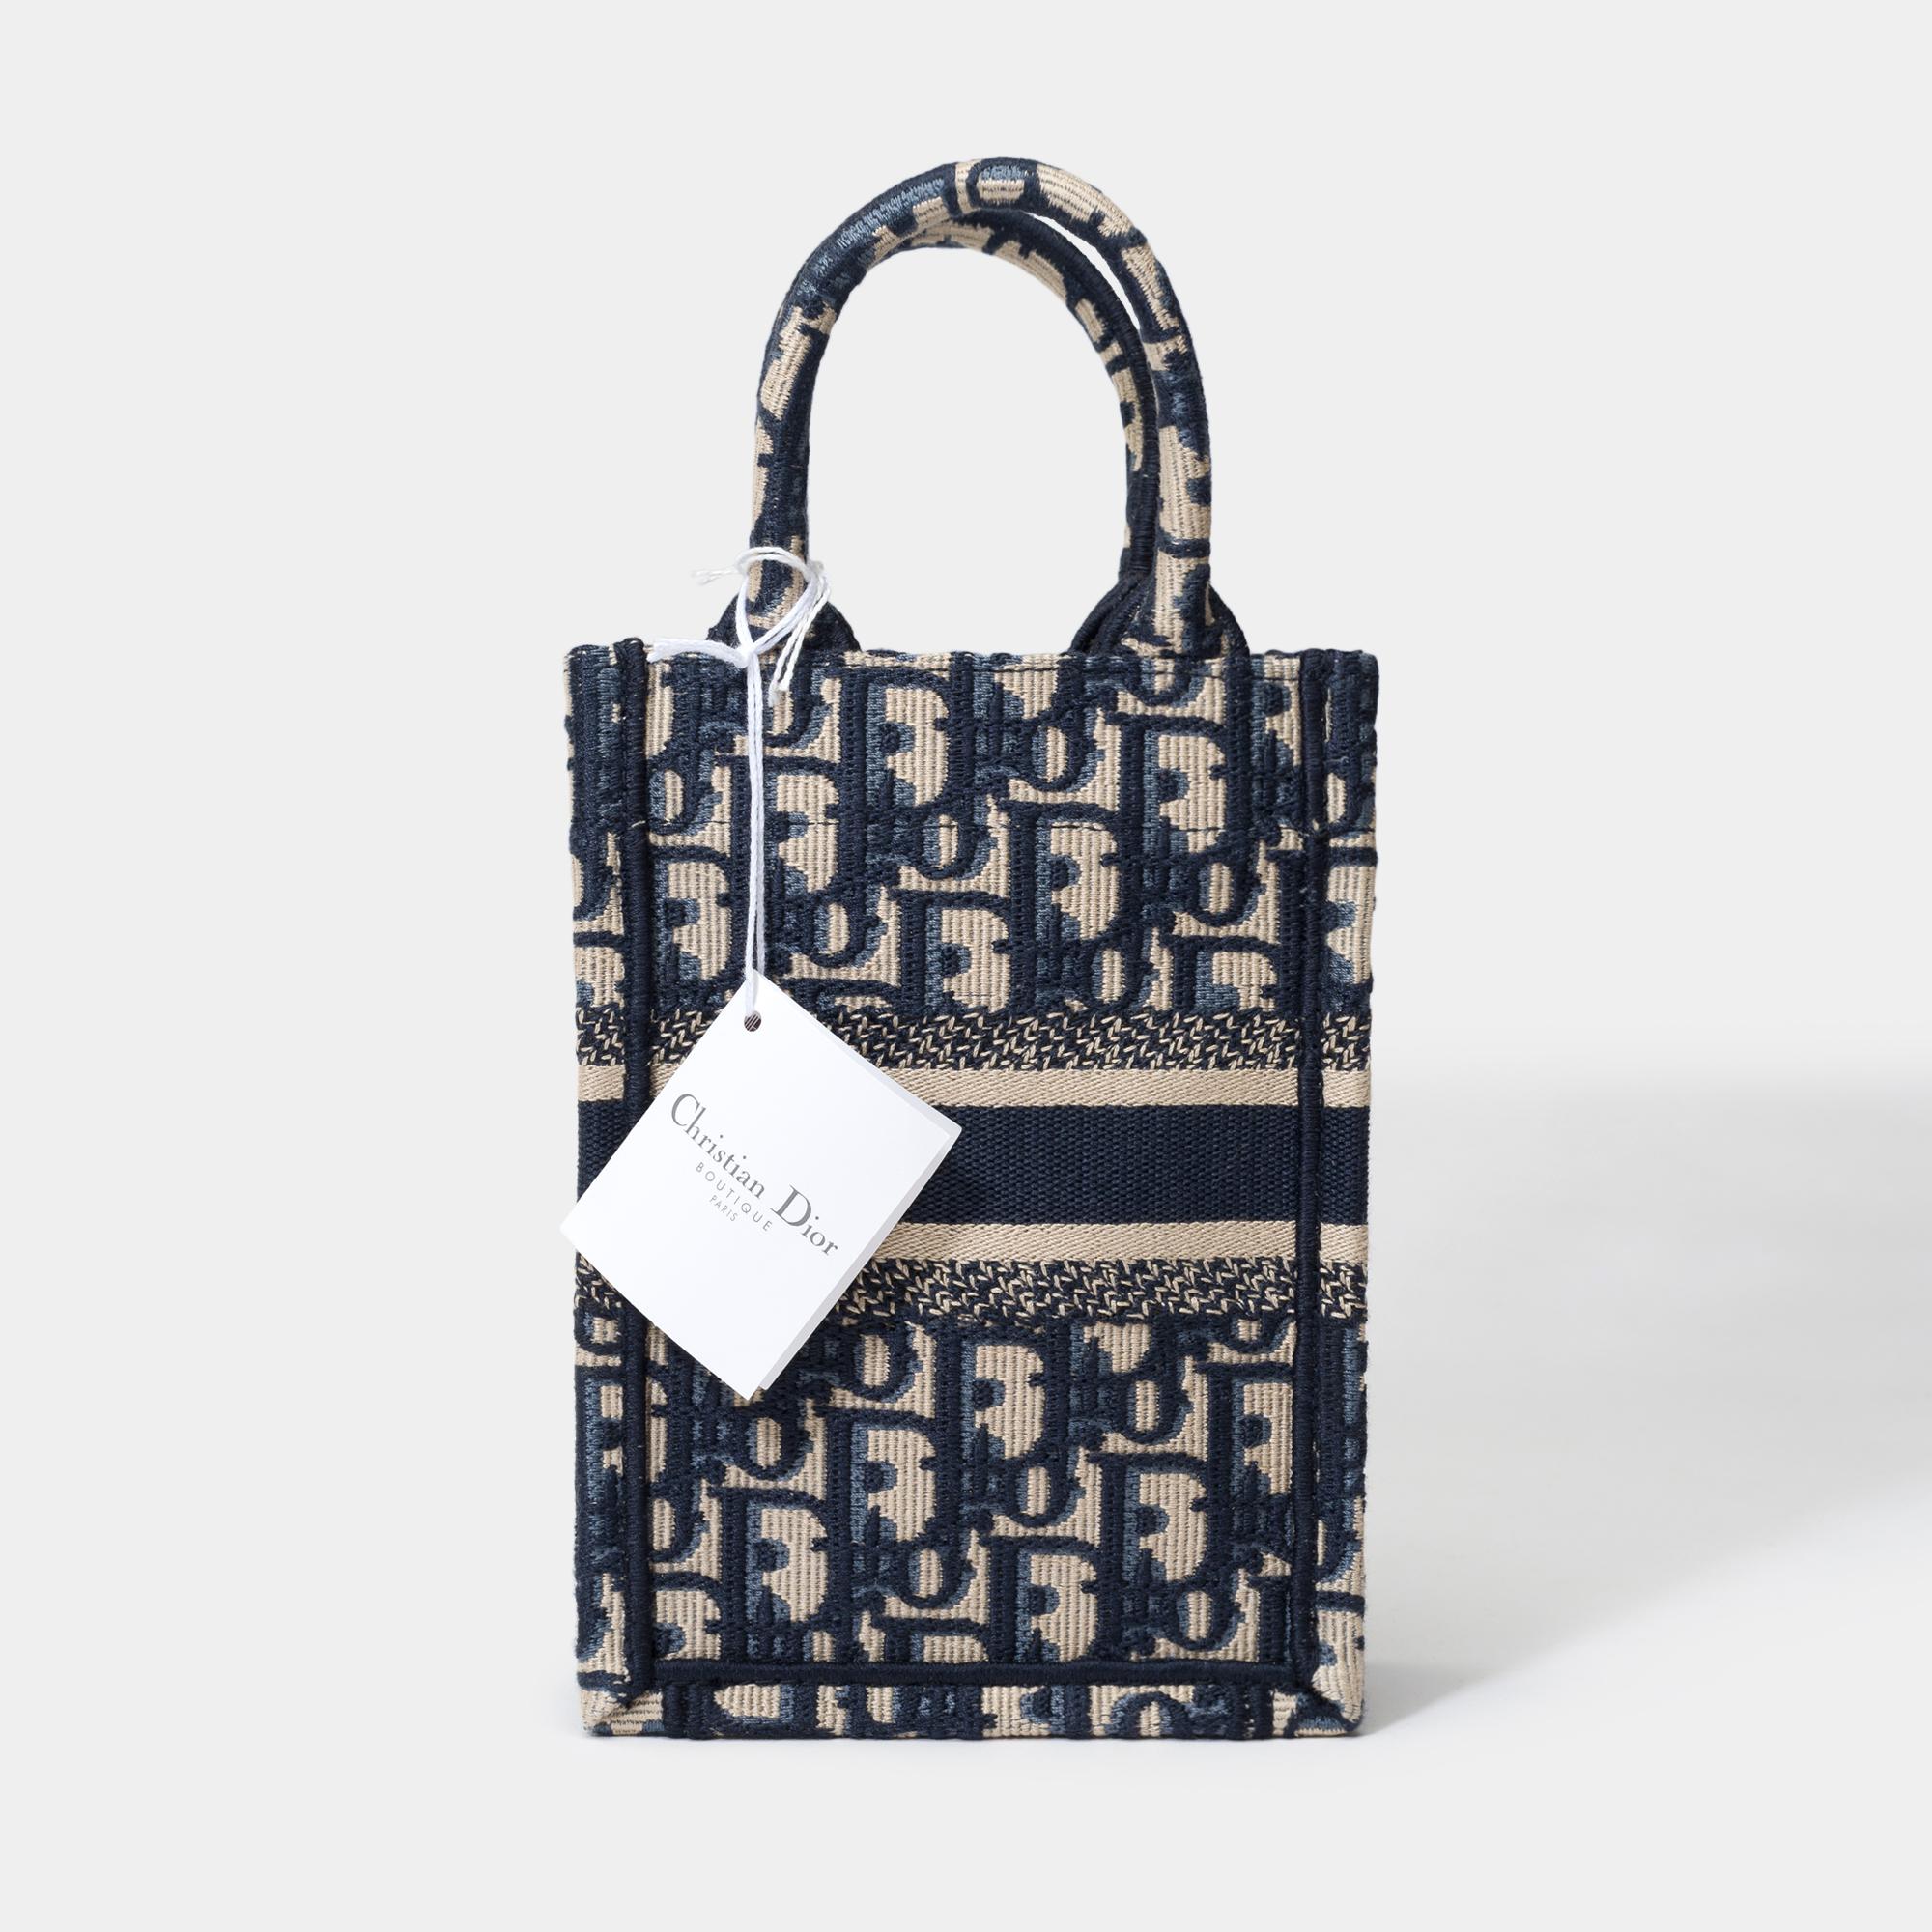 The​ ​vertical​ ​Tote​ ​bag​ ​enriches​ ​the​ ​iconic​ ​Dior​ ​Book​ ​Tote​ ​line.​ ​A​ ​perfect​ ​example​ ​of​ ​Dior​ ​craftsmanship,​ ​this​ ​model​ ​is​ ​entirely​ ​embroidered​ ​with​ ​the​ ​beige​ ​and​ ​navy​ ​canvas.​ ​Enhanced​ ​by​ ​the​